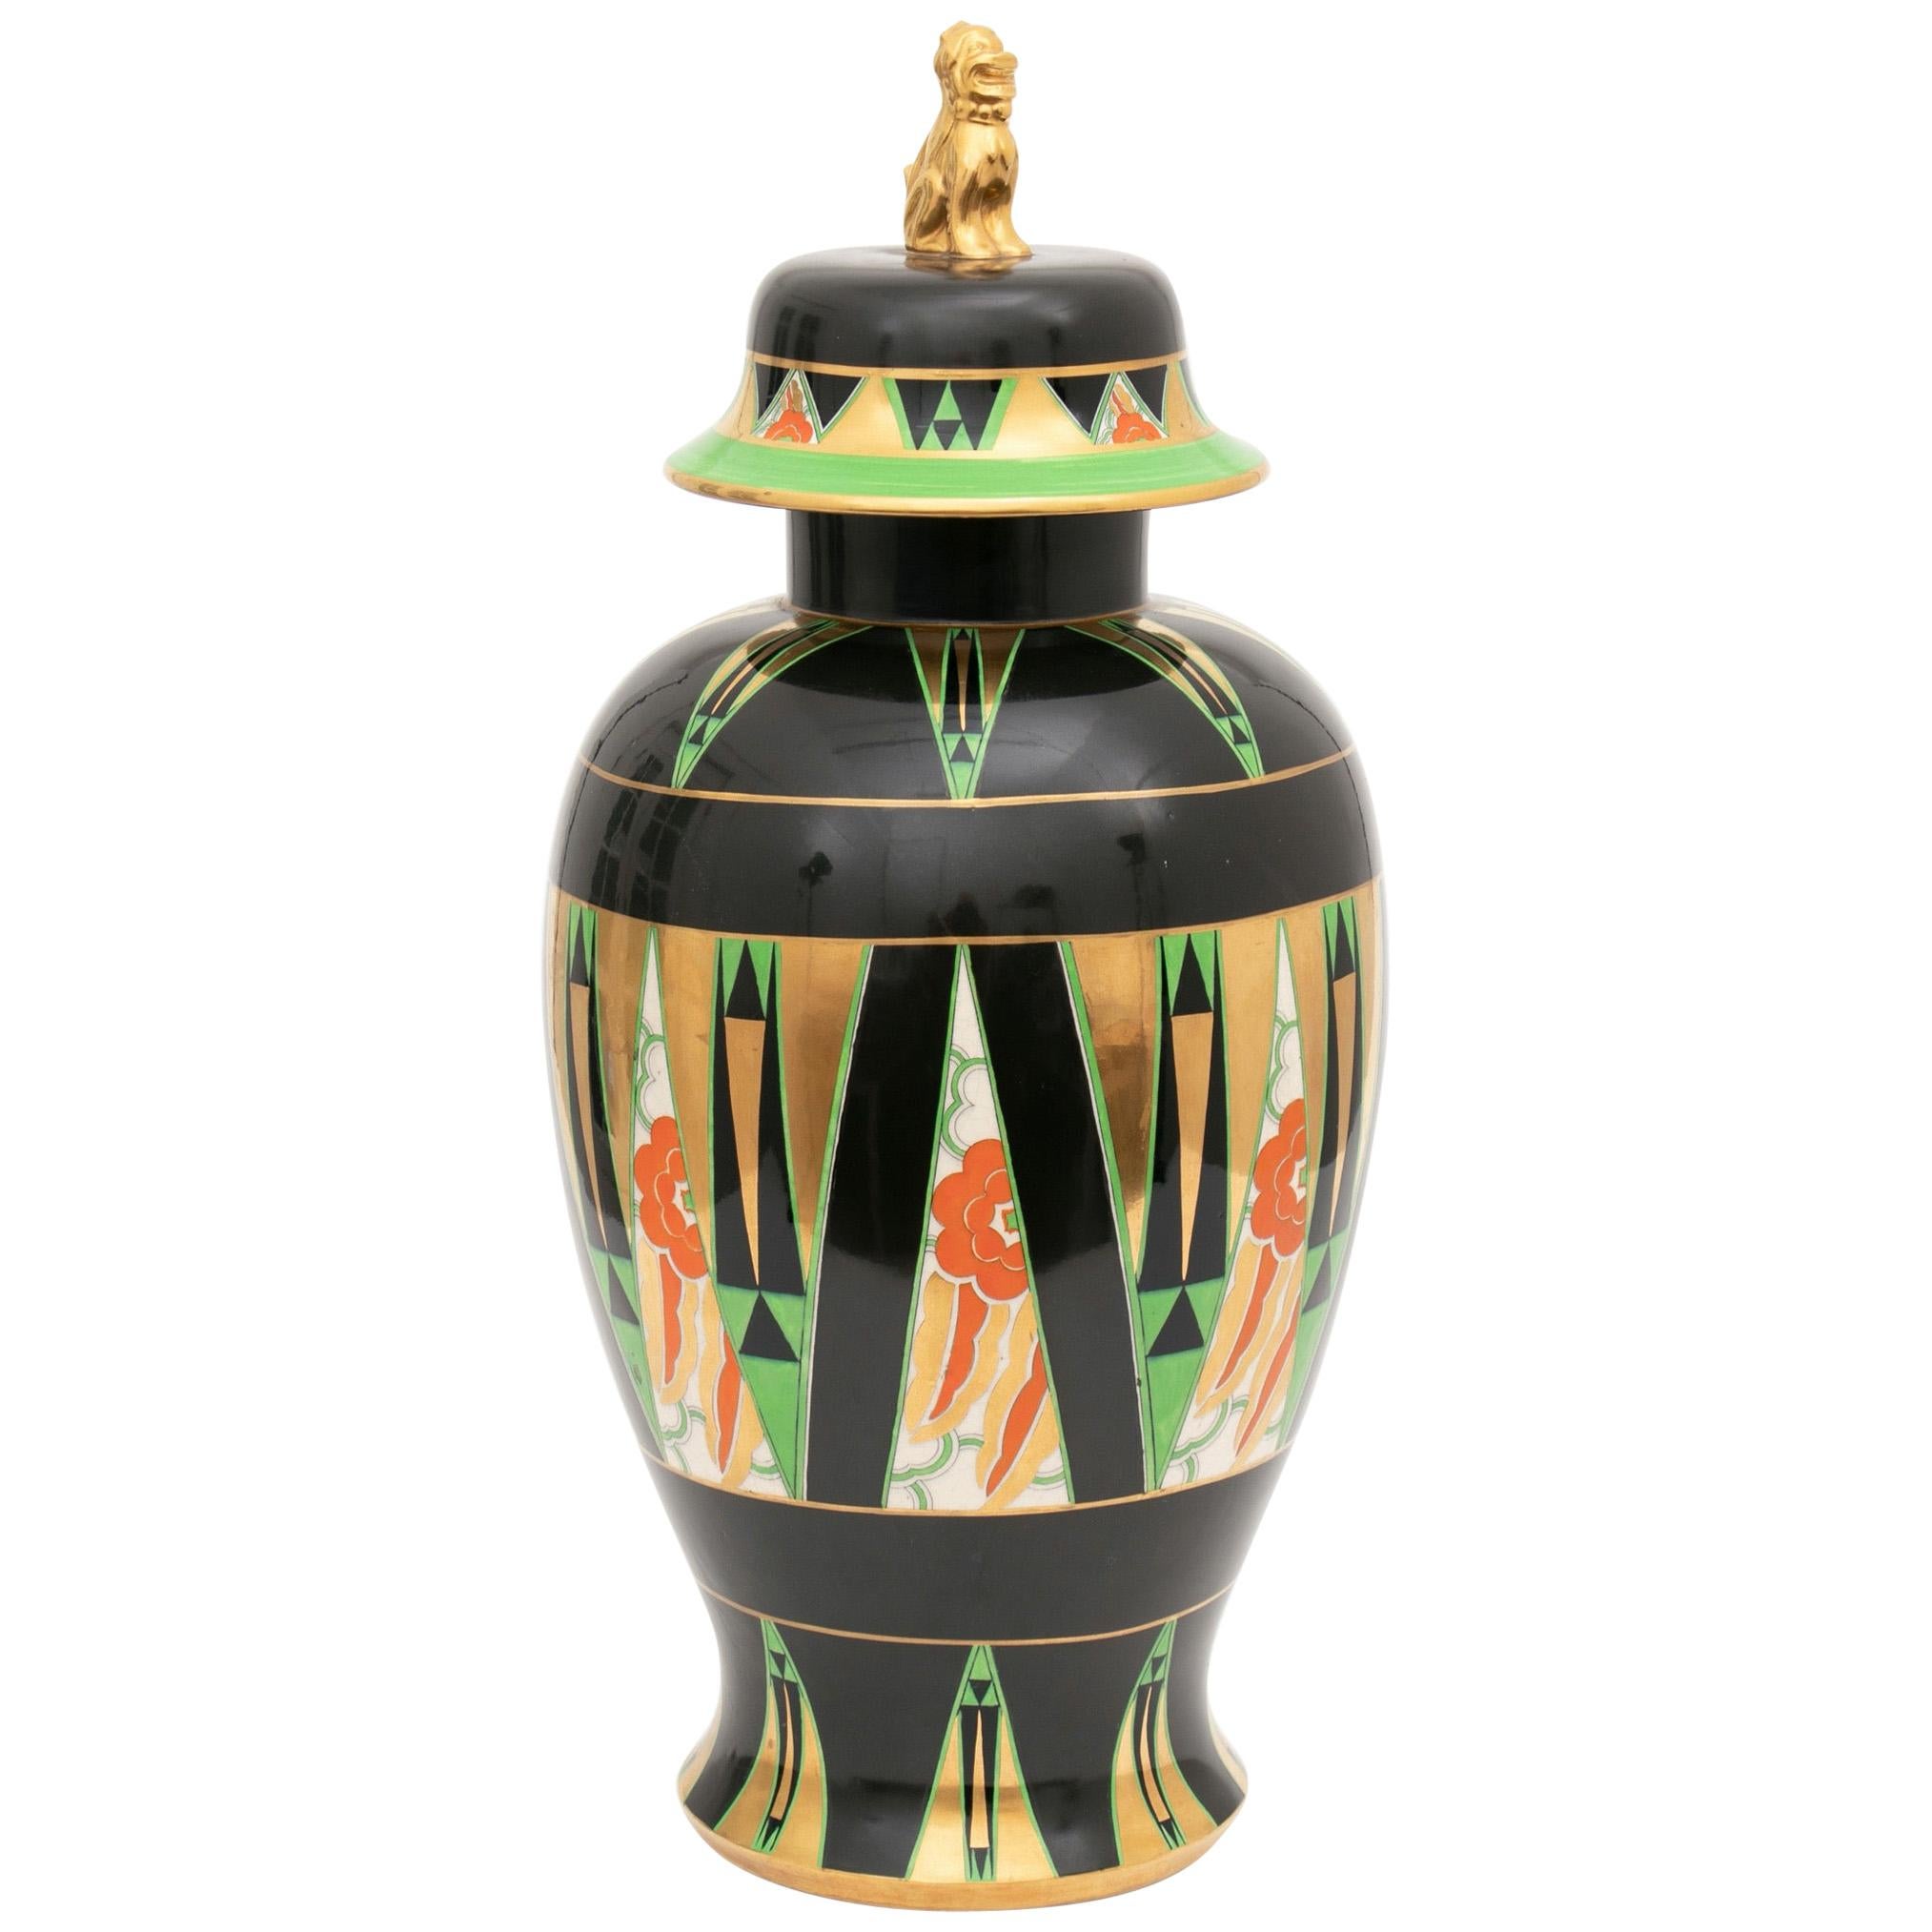 Art Deco Large Temple Vase by Enoch Boulton Enameled with the Orient Design For Sale